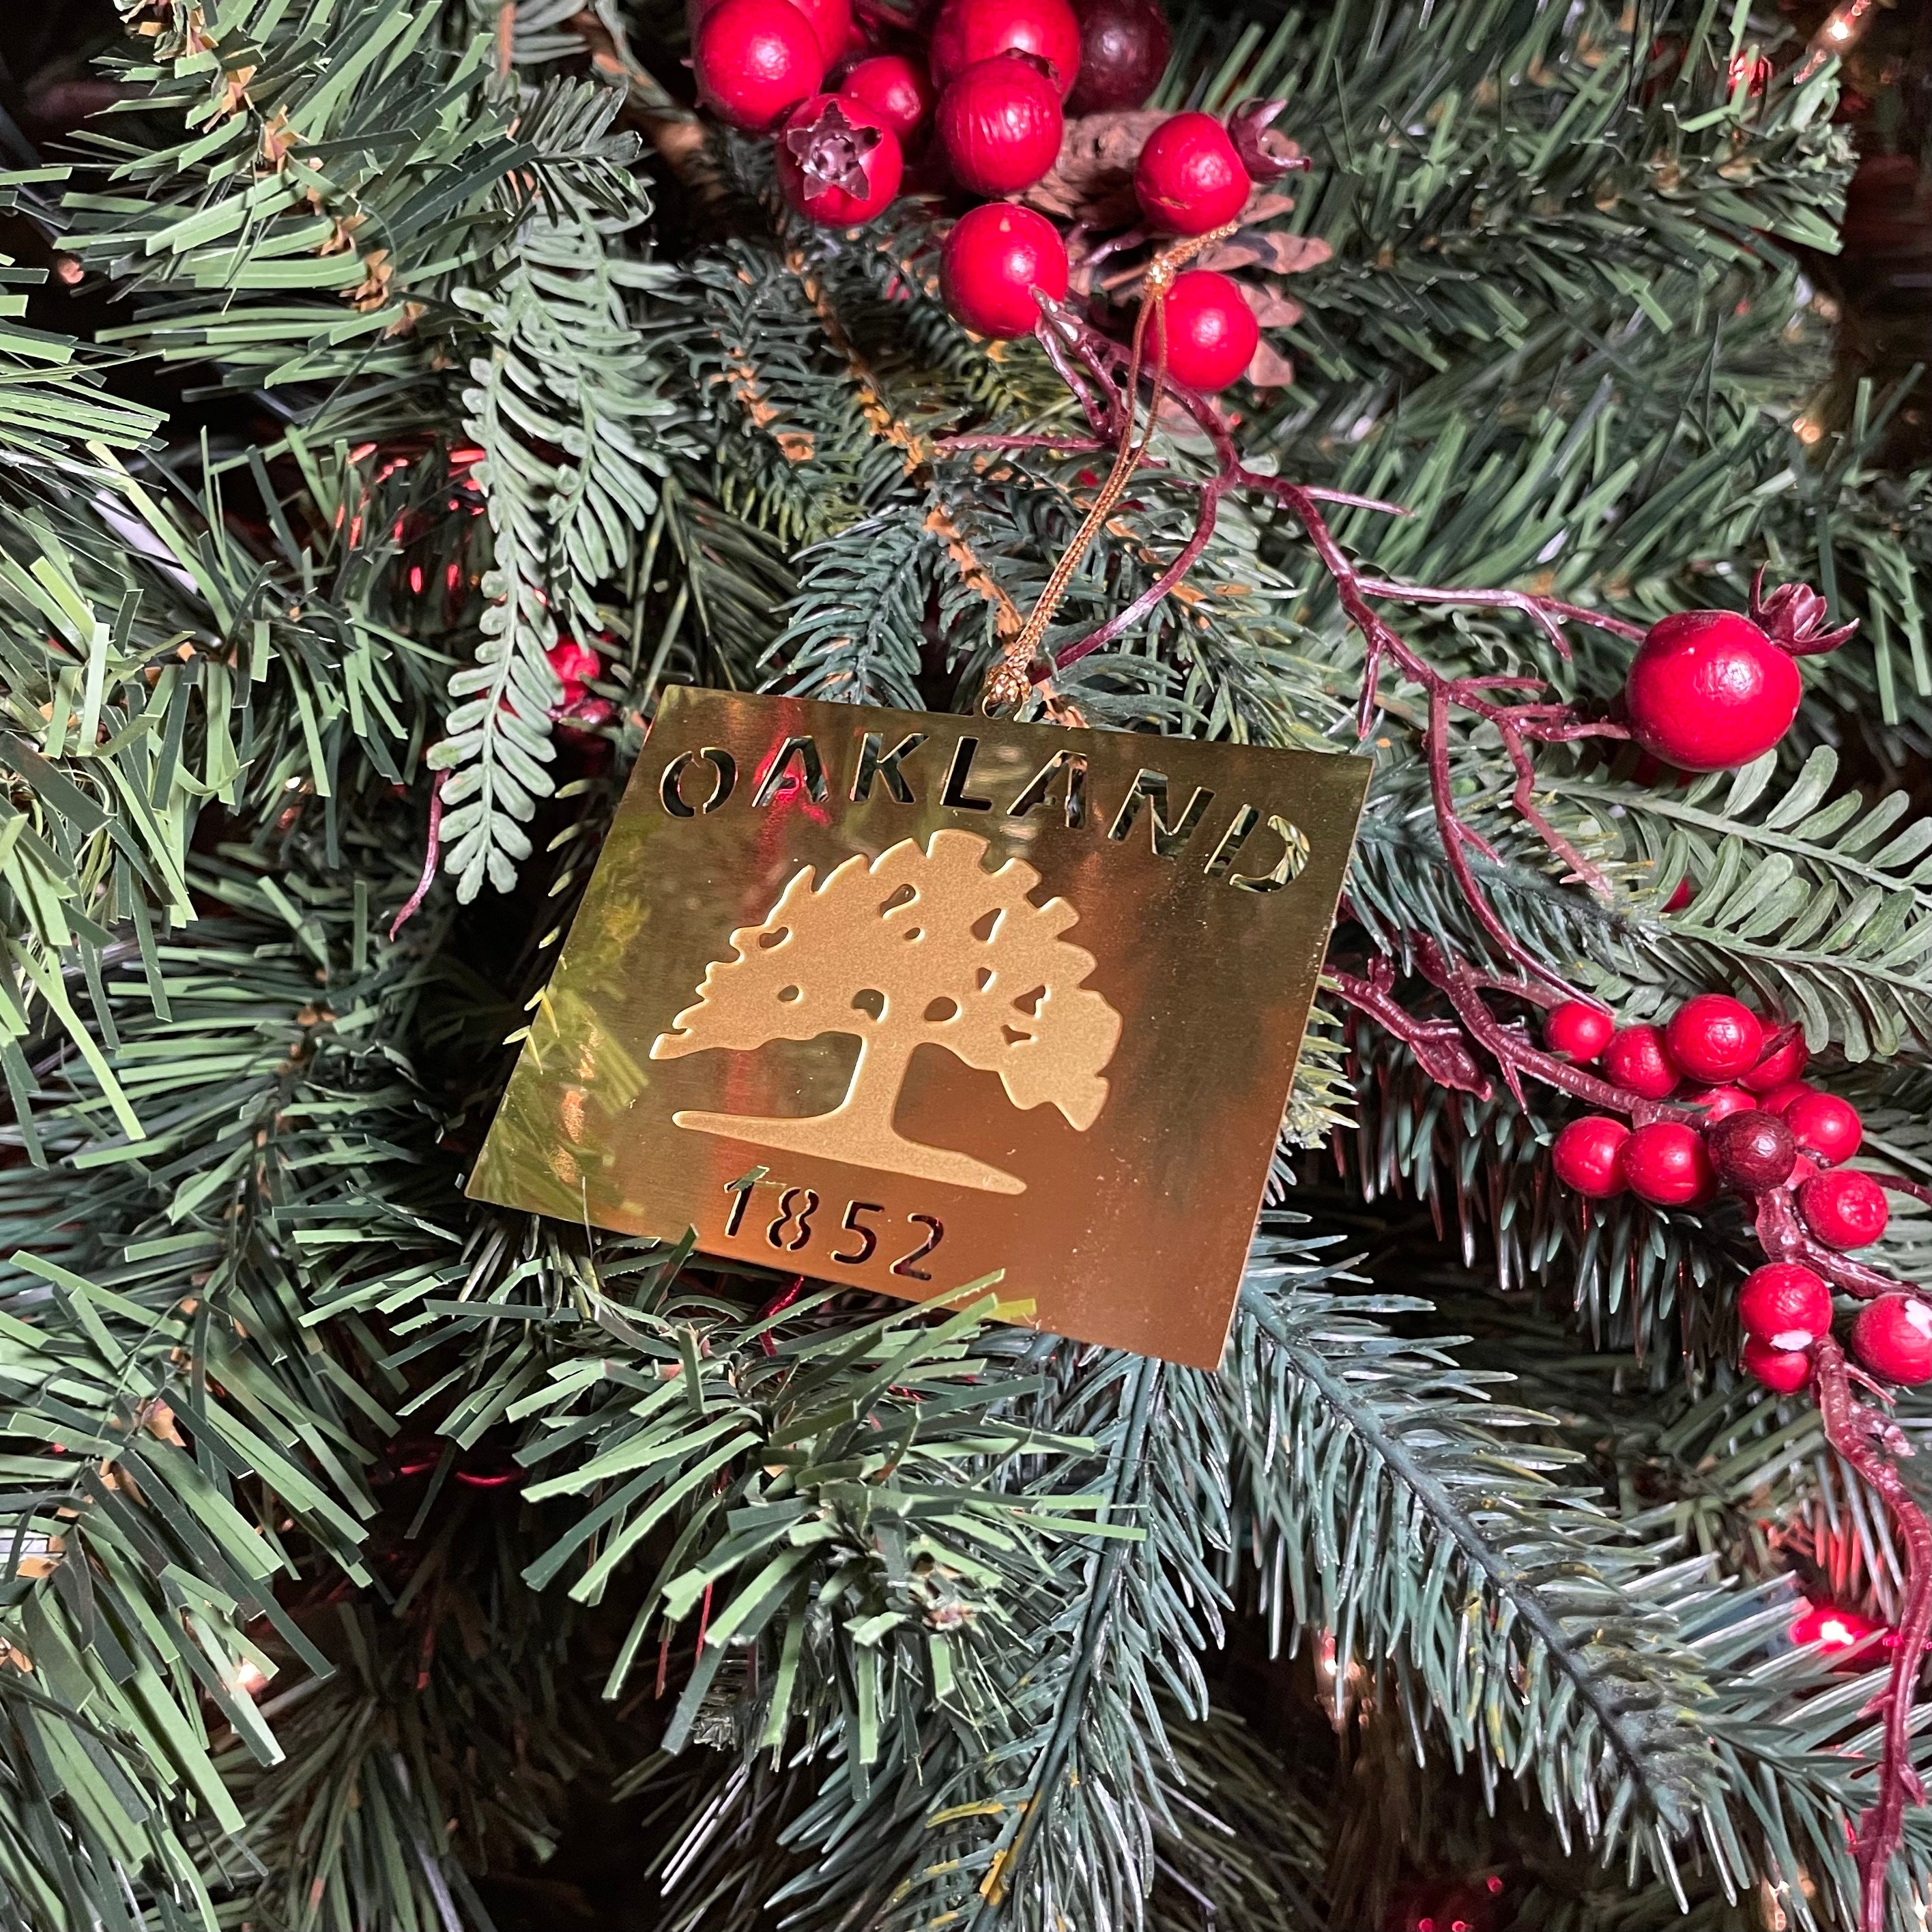 An Oakland flag is depicted in cut-out brass hanging on a decorated Christmas tree.